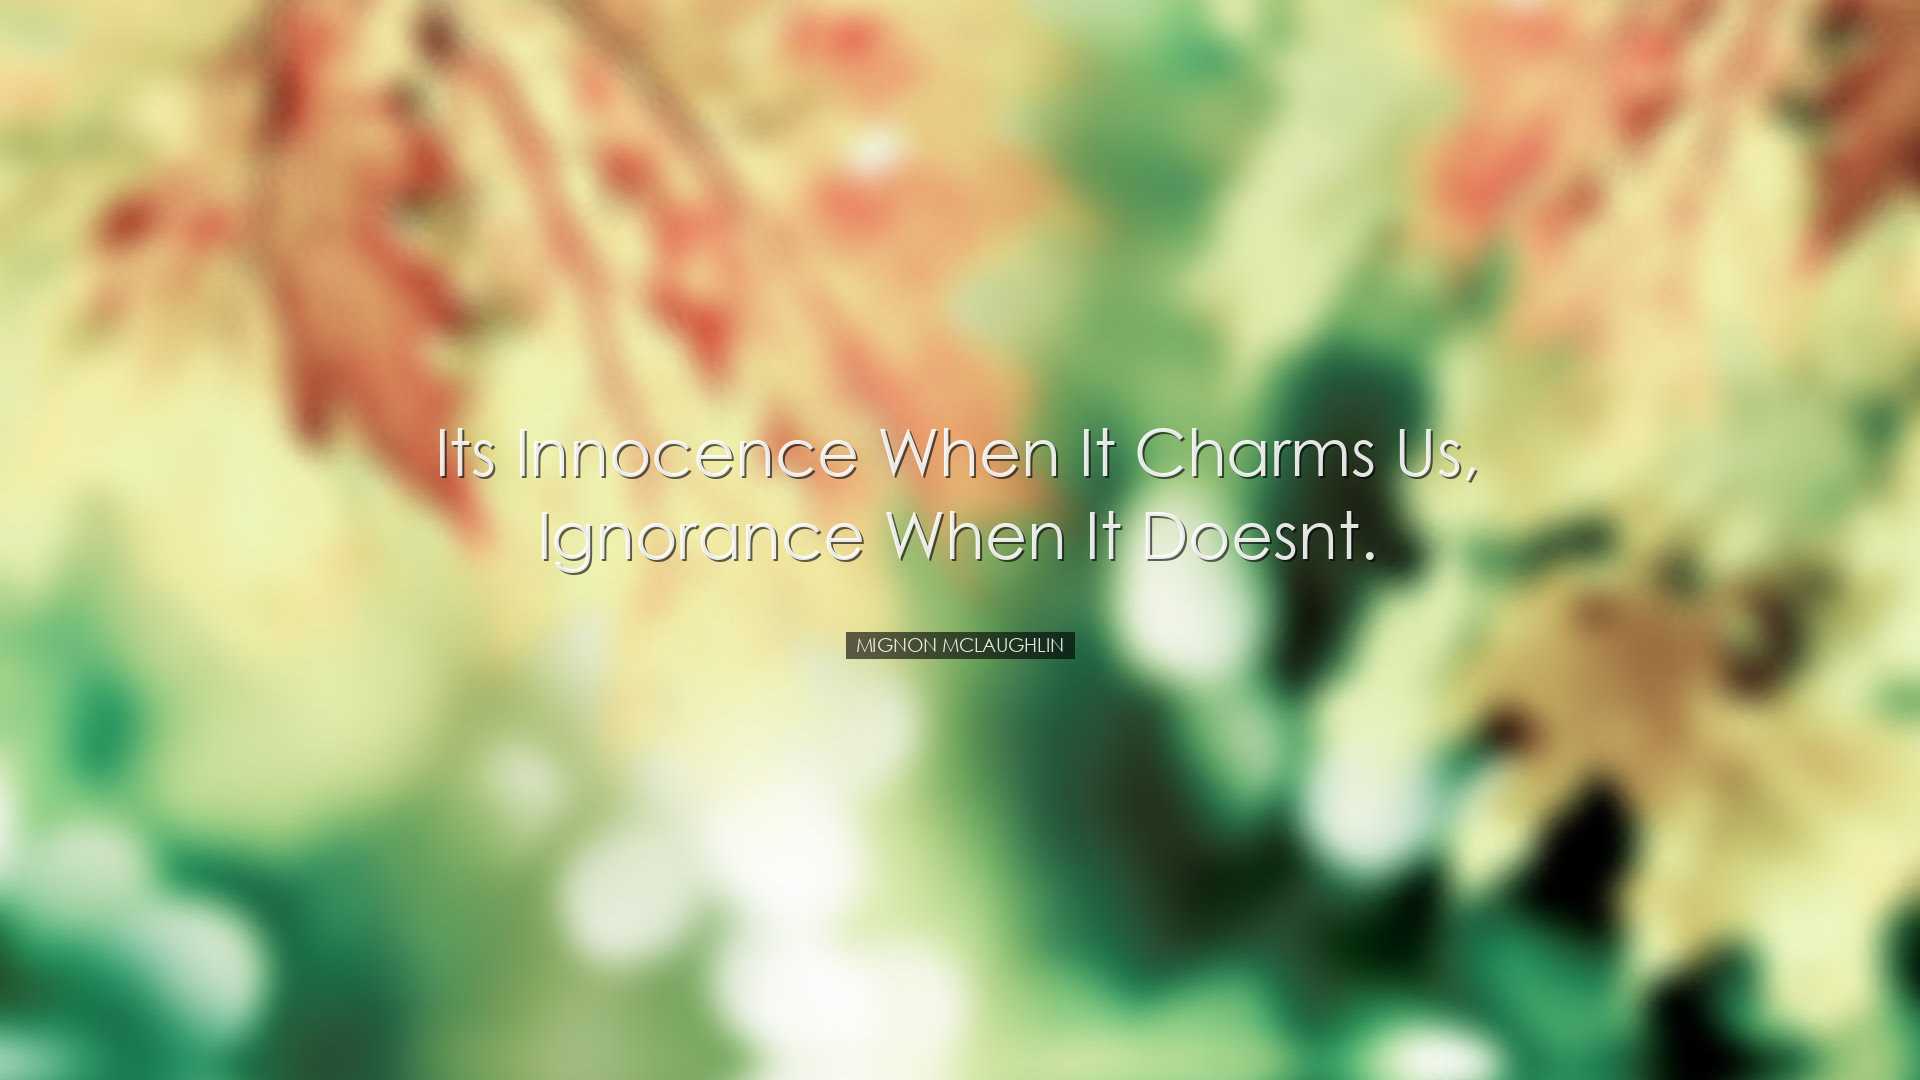 Its innocence when it charms us, ignorance when it doesnt. - Migno